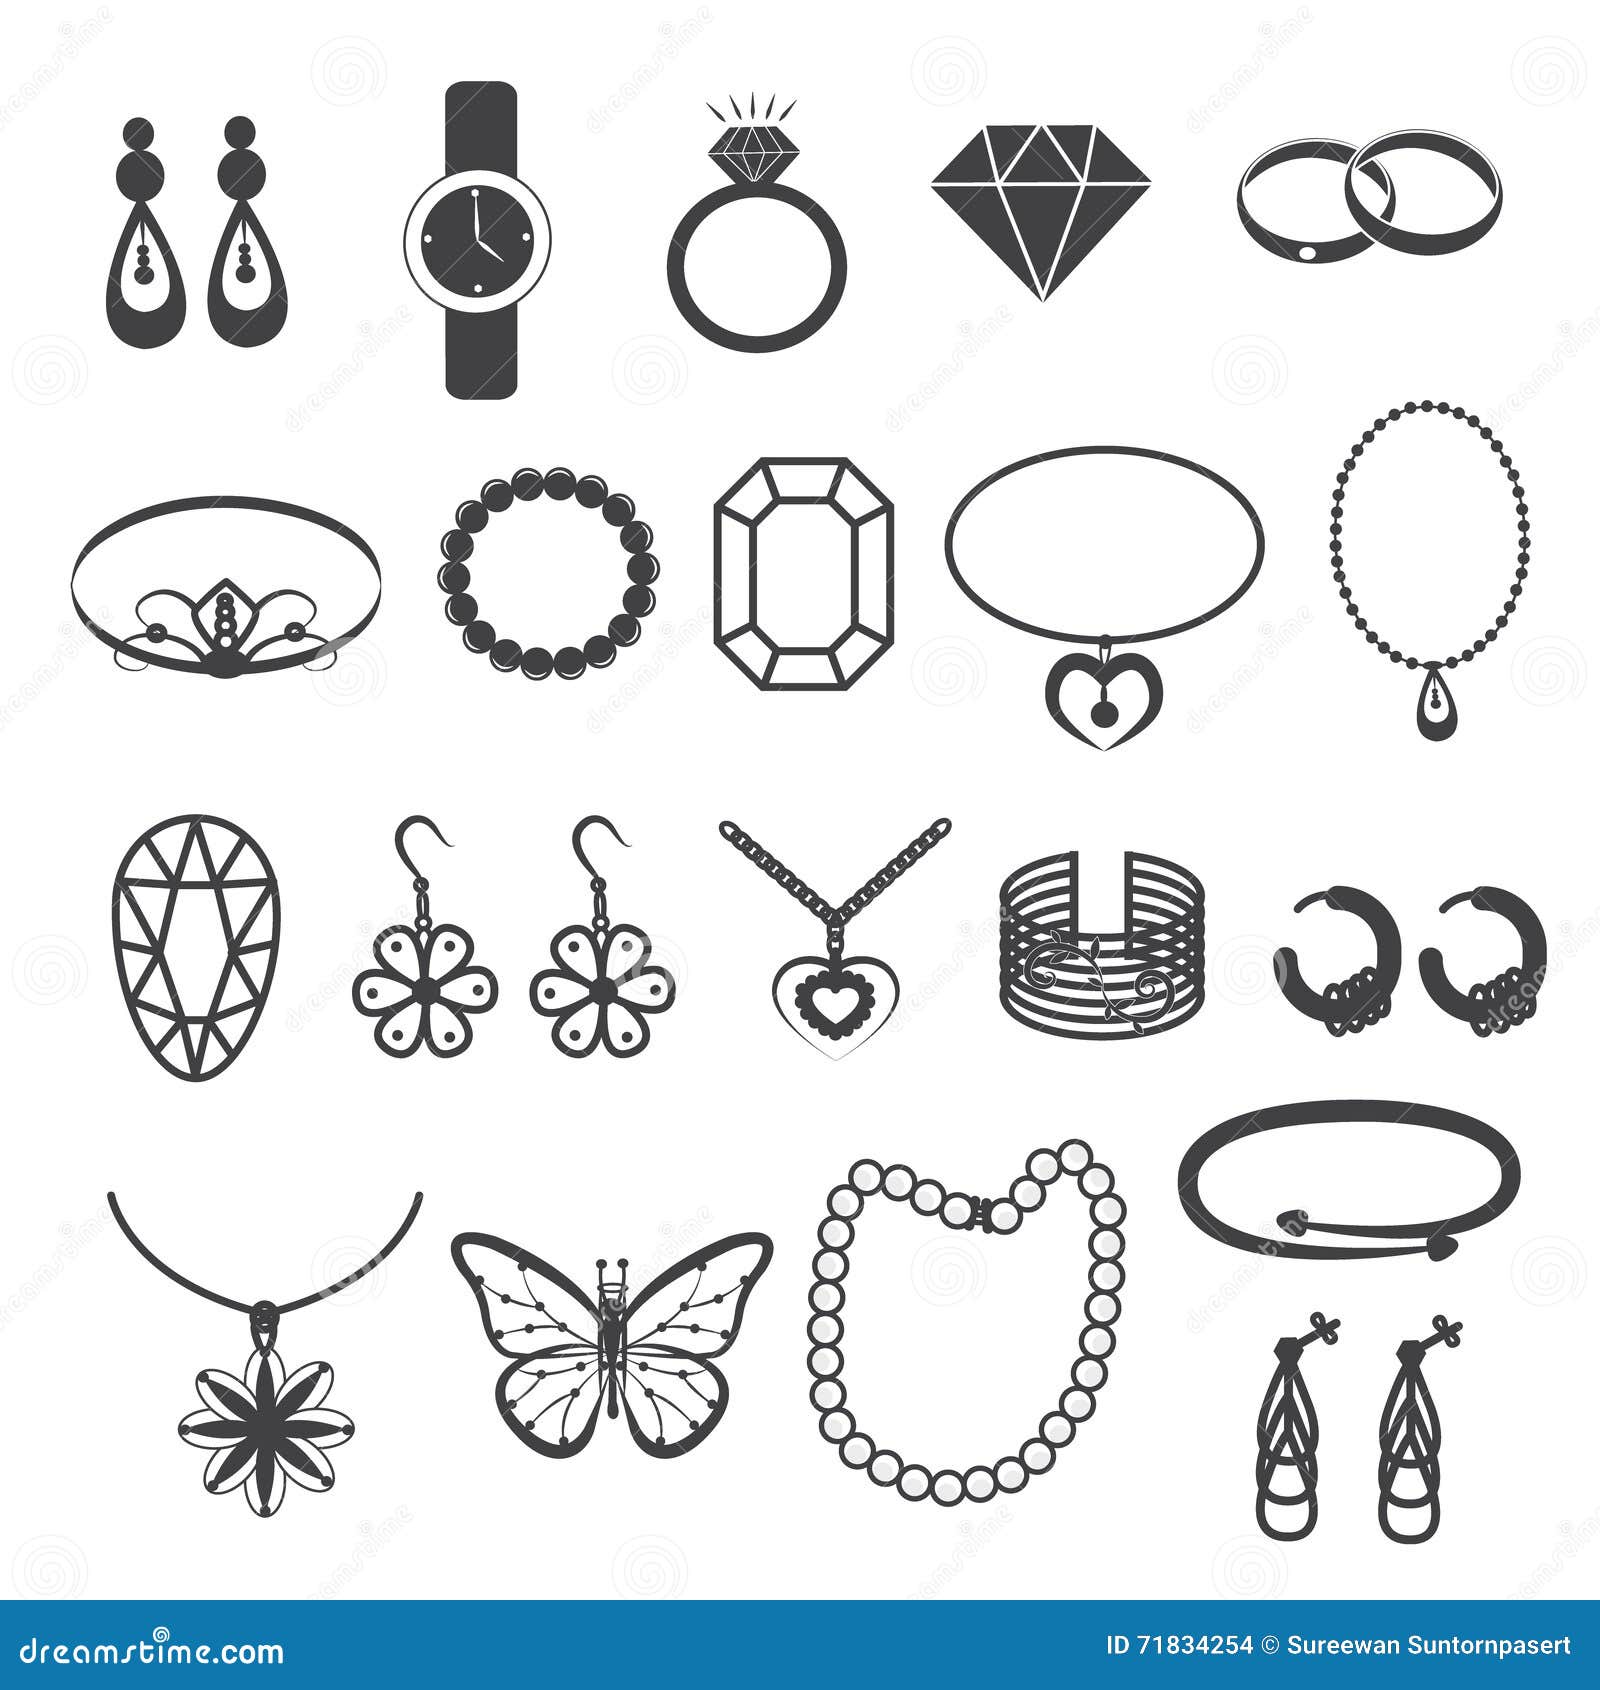 Jewelry Accessories and Gemstone Icons Set Stock Vector - Illustration ...